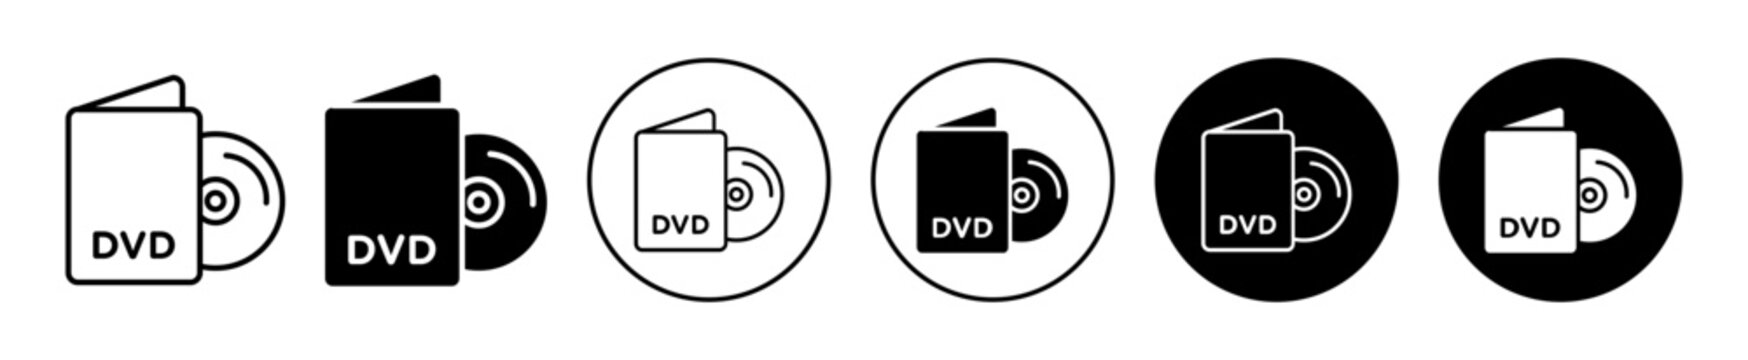 DVD icon. Digital versatile disc to store data information in video audio digital format. Blank plastic dvd cover or cd rom memory in computer logo vector. music cd or dvd record for backup case 